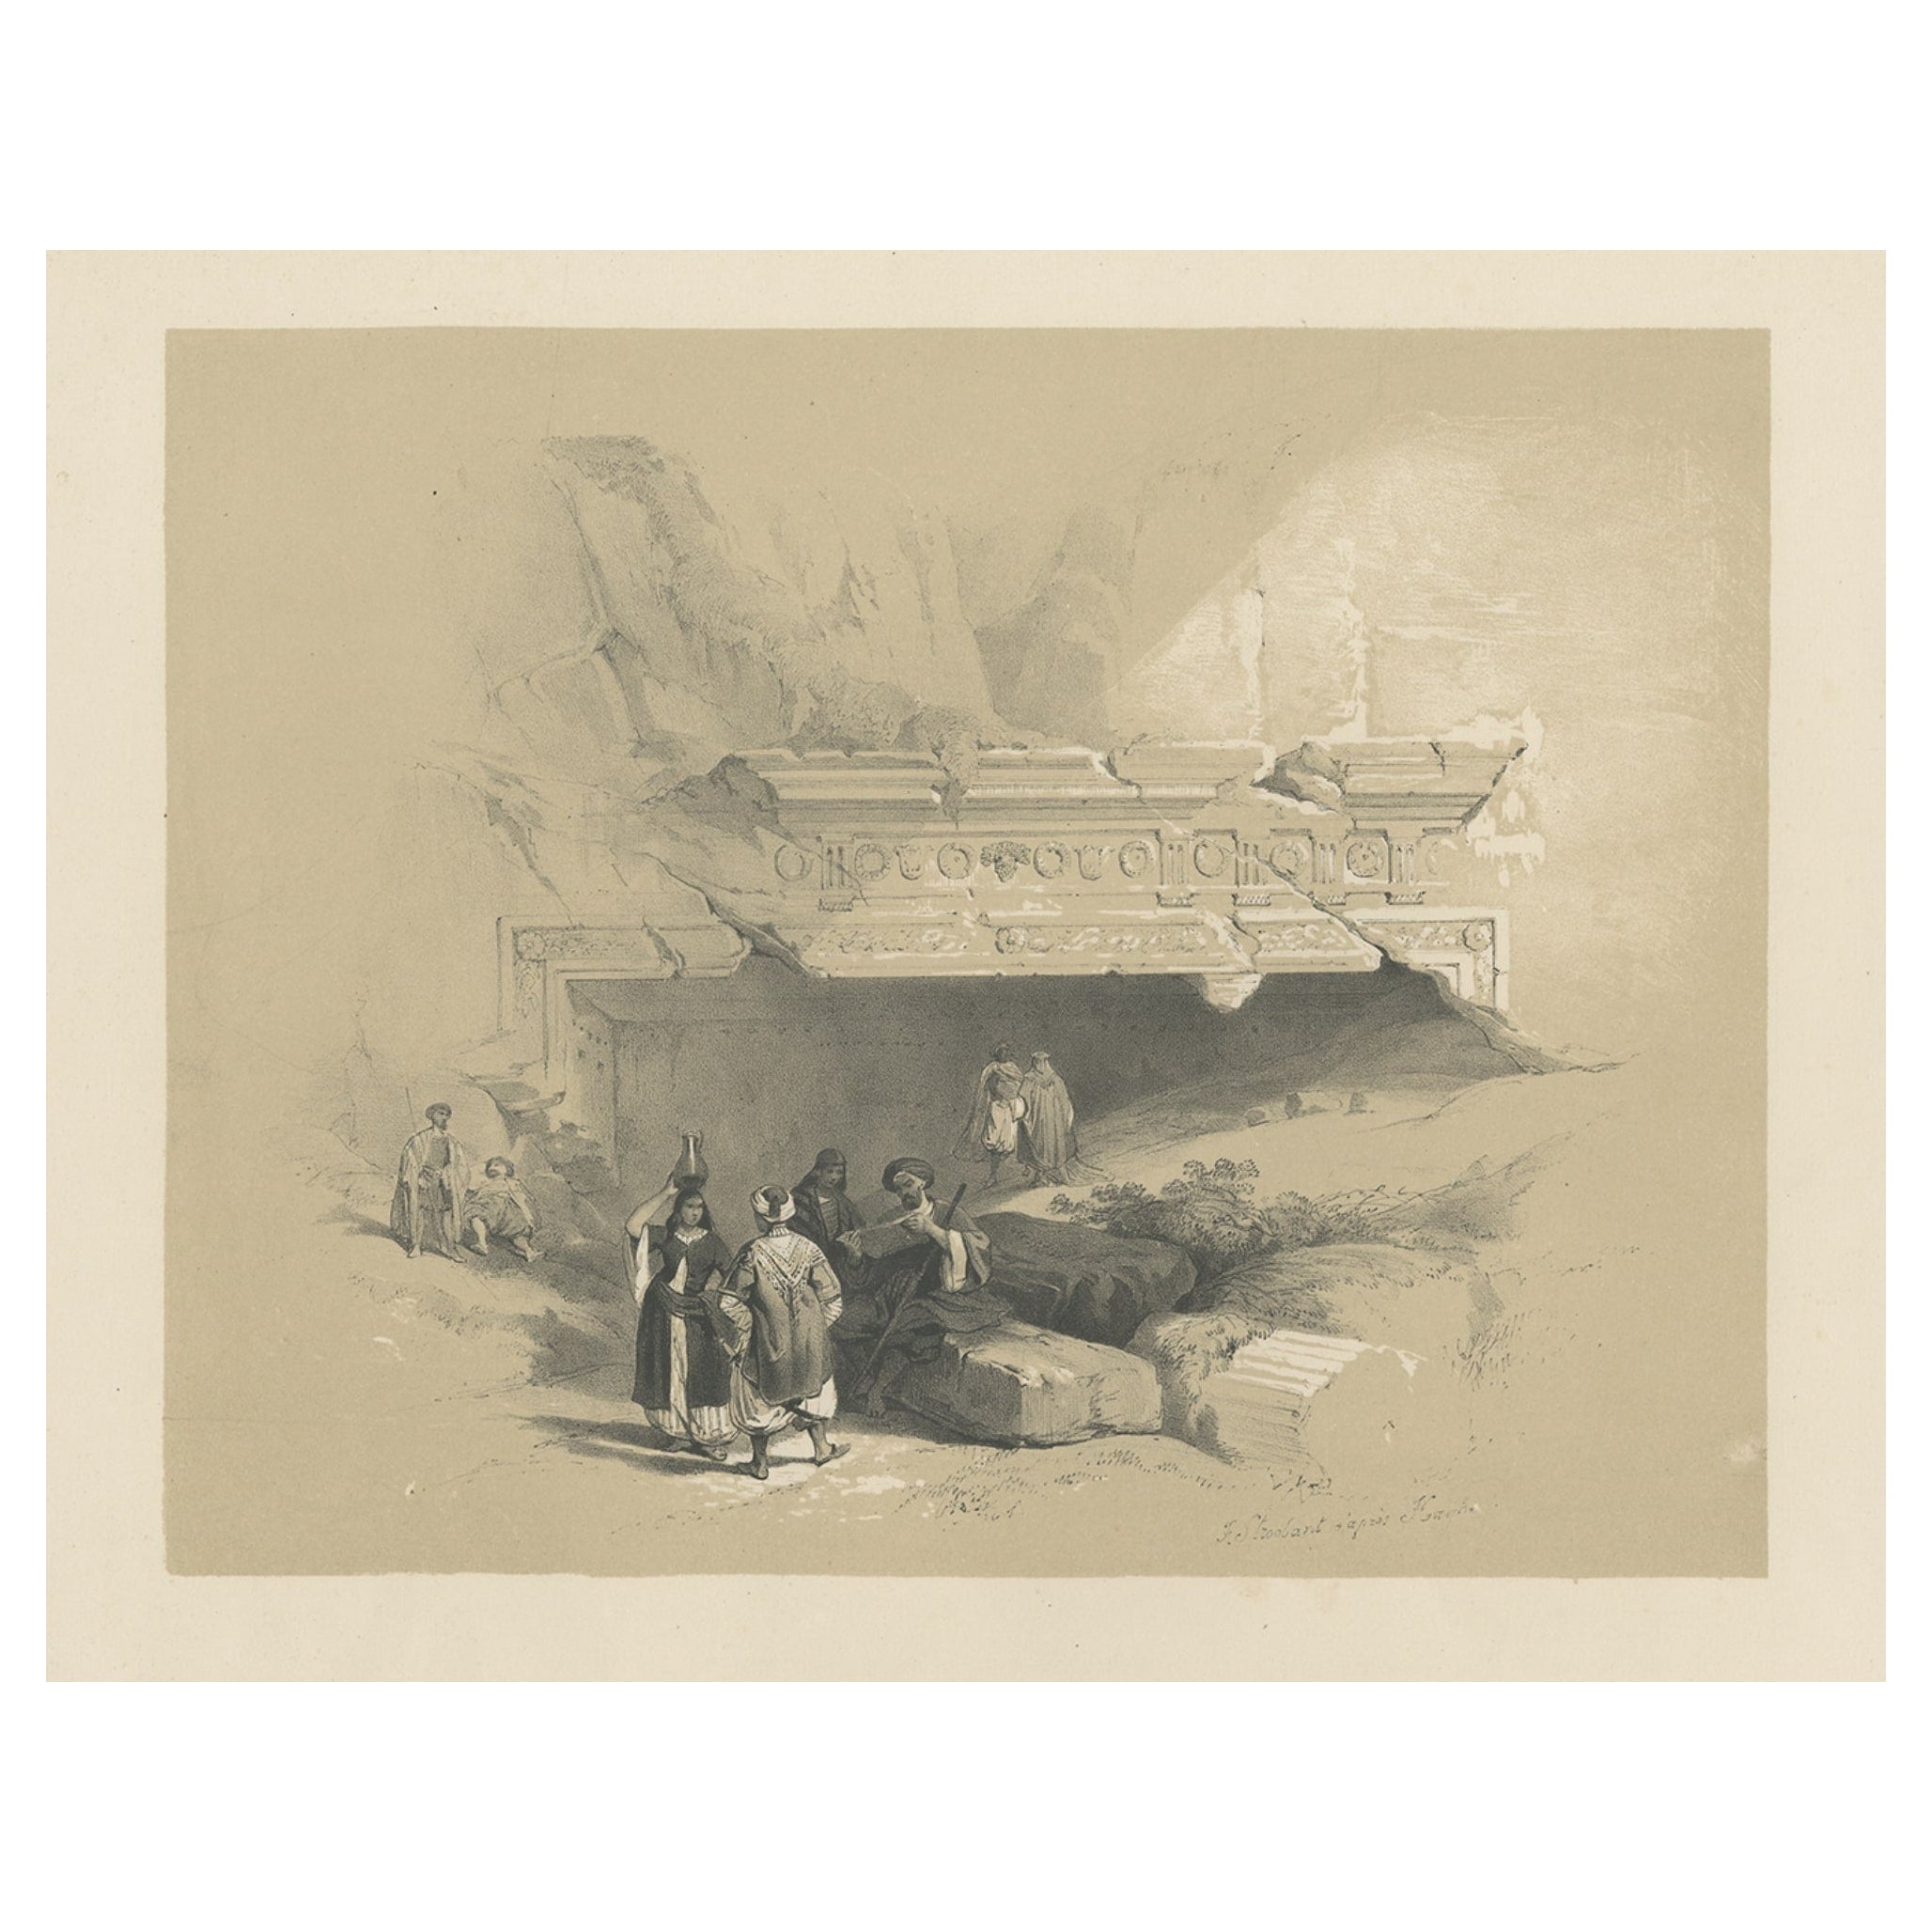 Old Print of the Tombs of the Kings, Jerusalem, ca. 1845